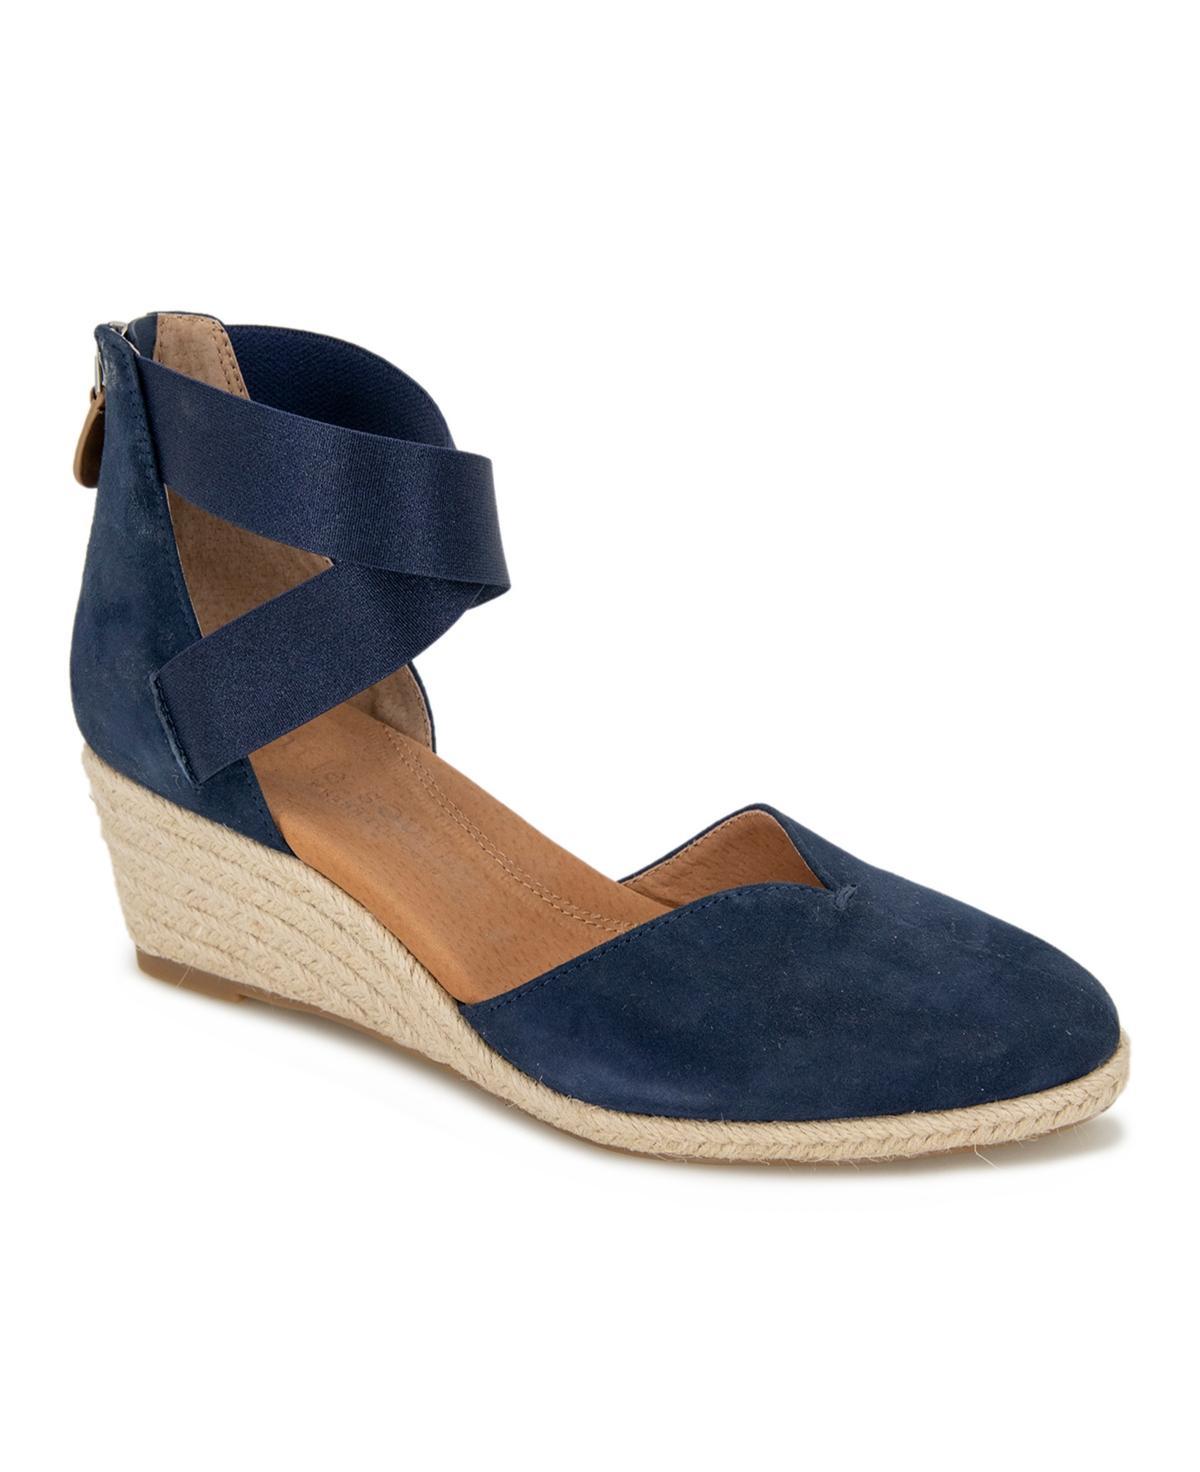 GENTLE SOULS BY KENNETH COLE Orya Espadrille Wedge Sandal Product Image